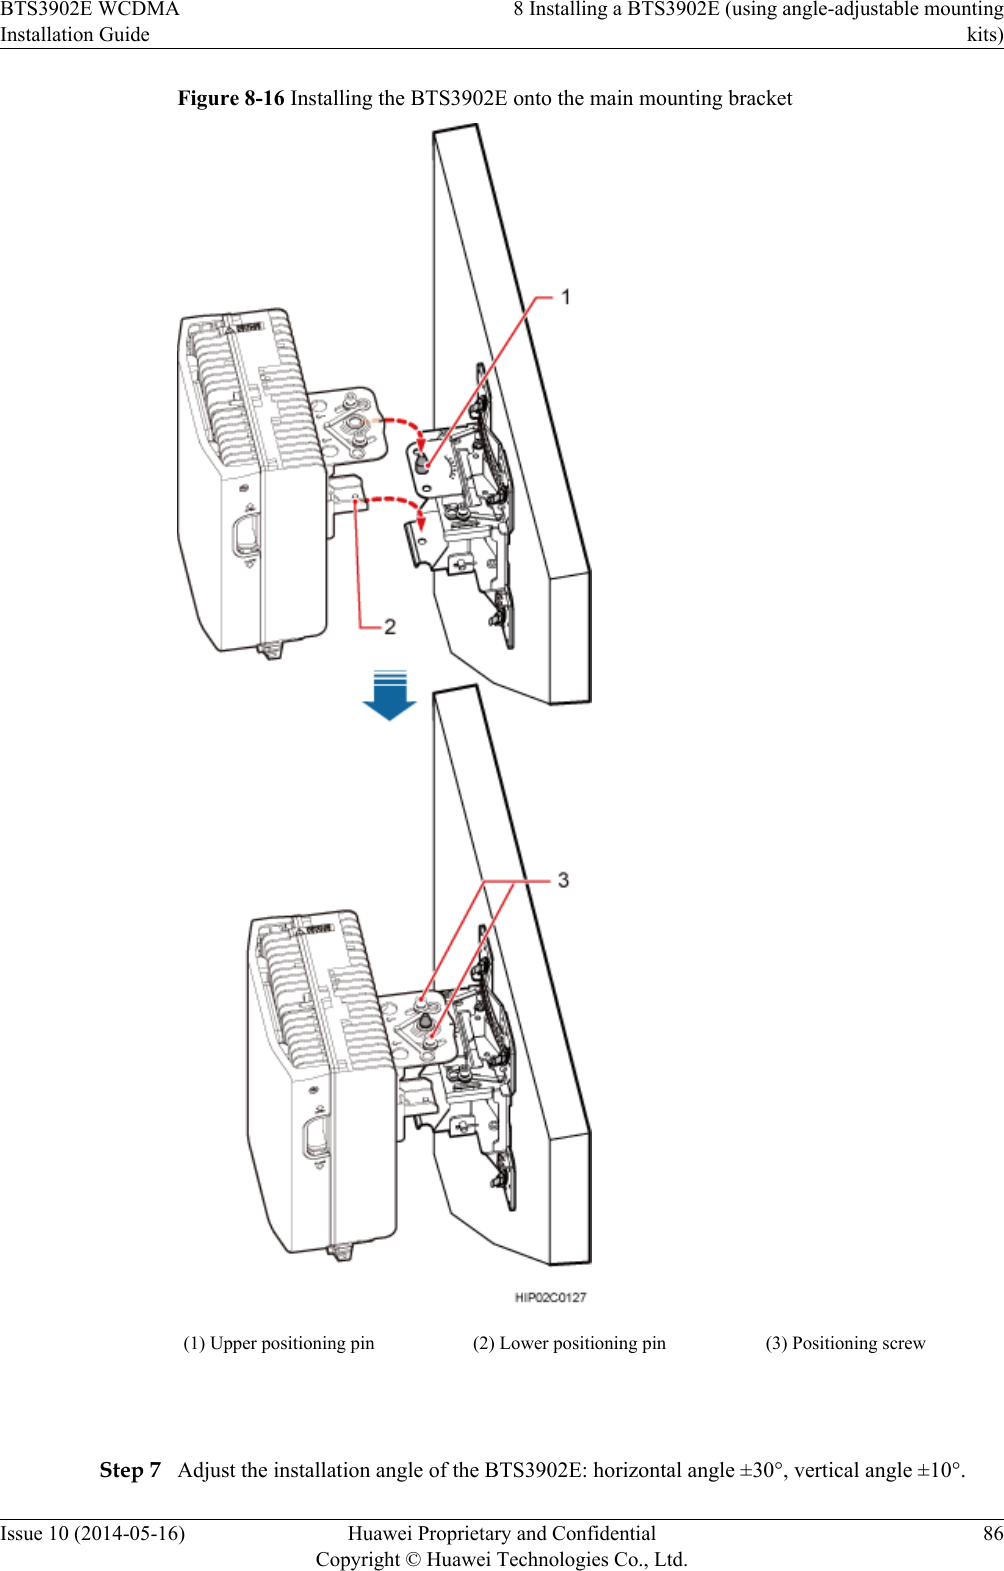 Figure 8-16 Installing the BTS3902E onto the main mounting bracket(1) Upper positioning pin (2) Lower positioning pin (3) Positioning screw Step 7 Adjust the installation angle of the BTS3902E: horizontal angle ±30°, vertical angle ±10°.BTS3902E WCDMAInstallation Guide8 Installing a BTS3902E (using angle-adjustable mountingkits)Issue 10 (2014-05-16) Huawei Proprietary and ConfidentialCopyright © Huawei Technologies Co., Ltd.86